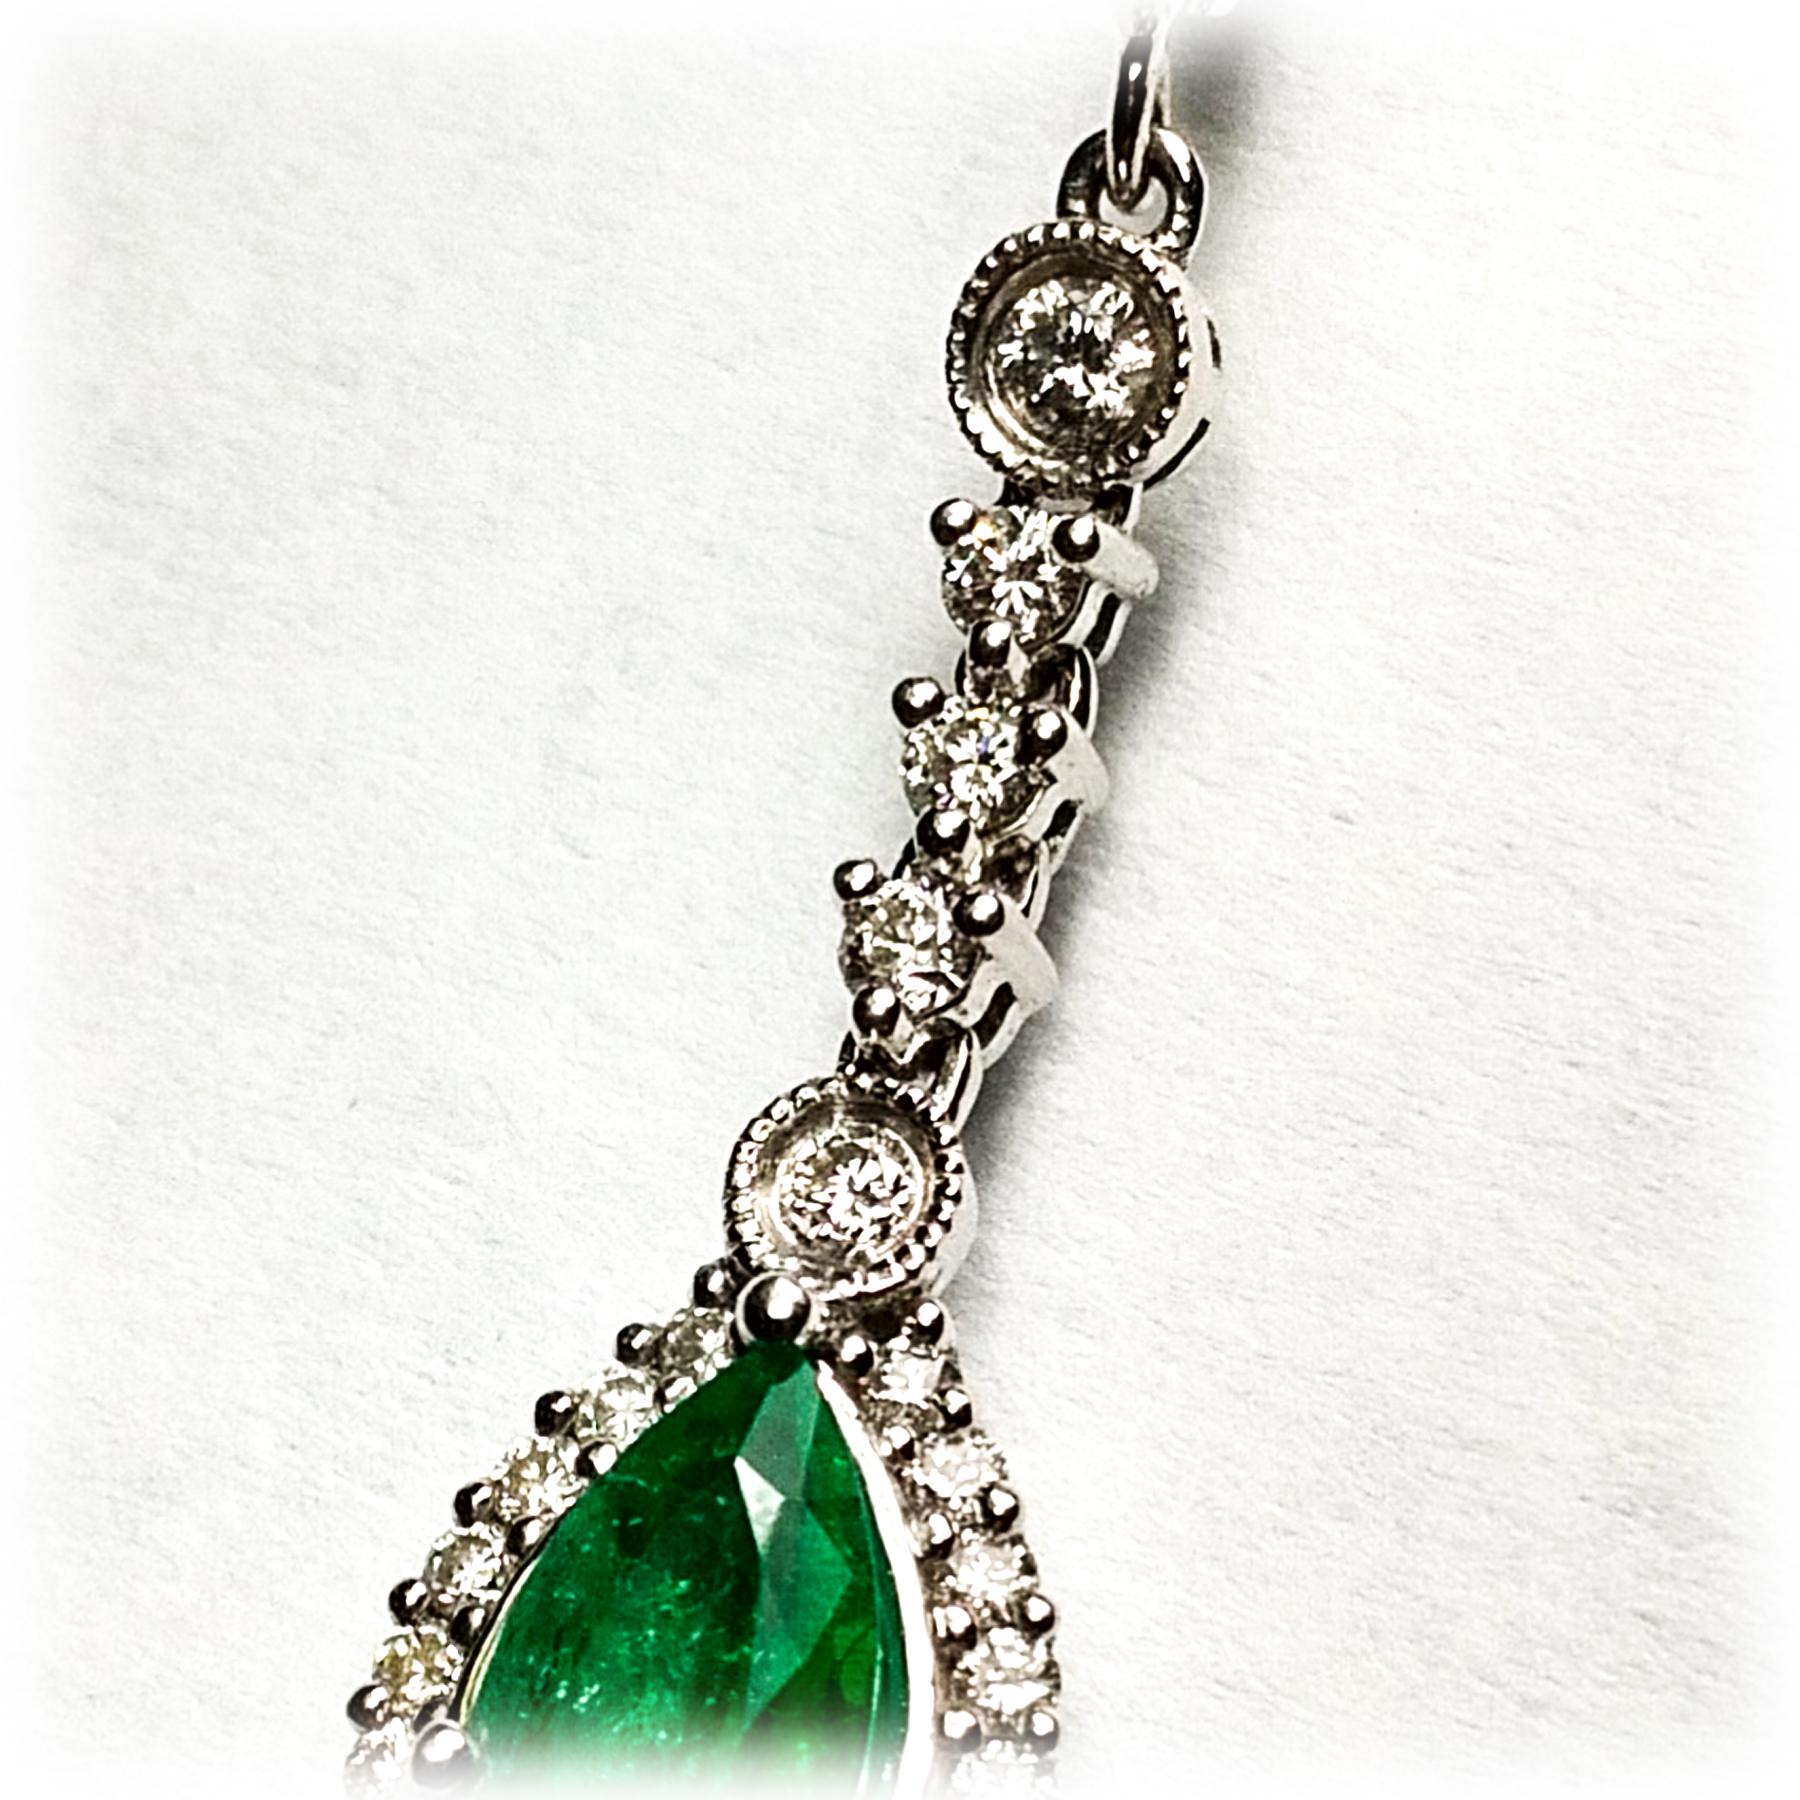 Elegant pear shape emerald and diamond dangling earrings. Lively green pear shape matching emerald framed with round brilliant cut diamonds. Handcrafted dangling design set in 18 karat white gold. 

Emerald: 1.53 its, pear shape, lively